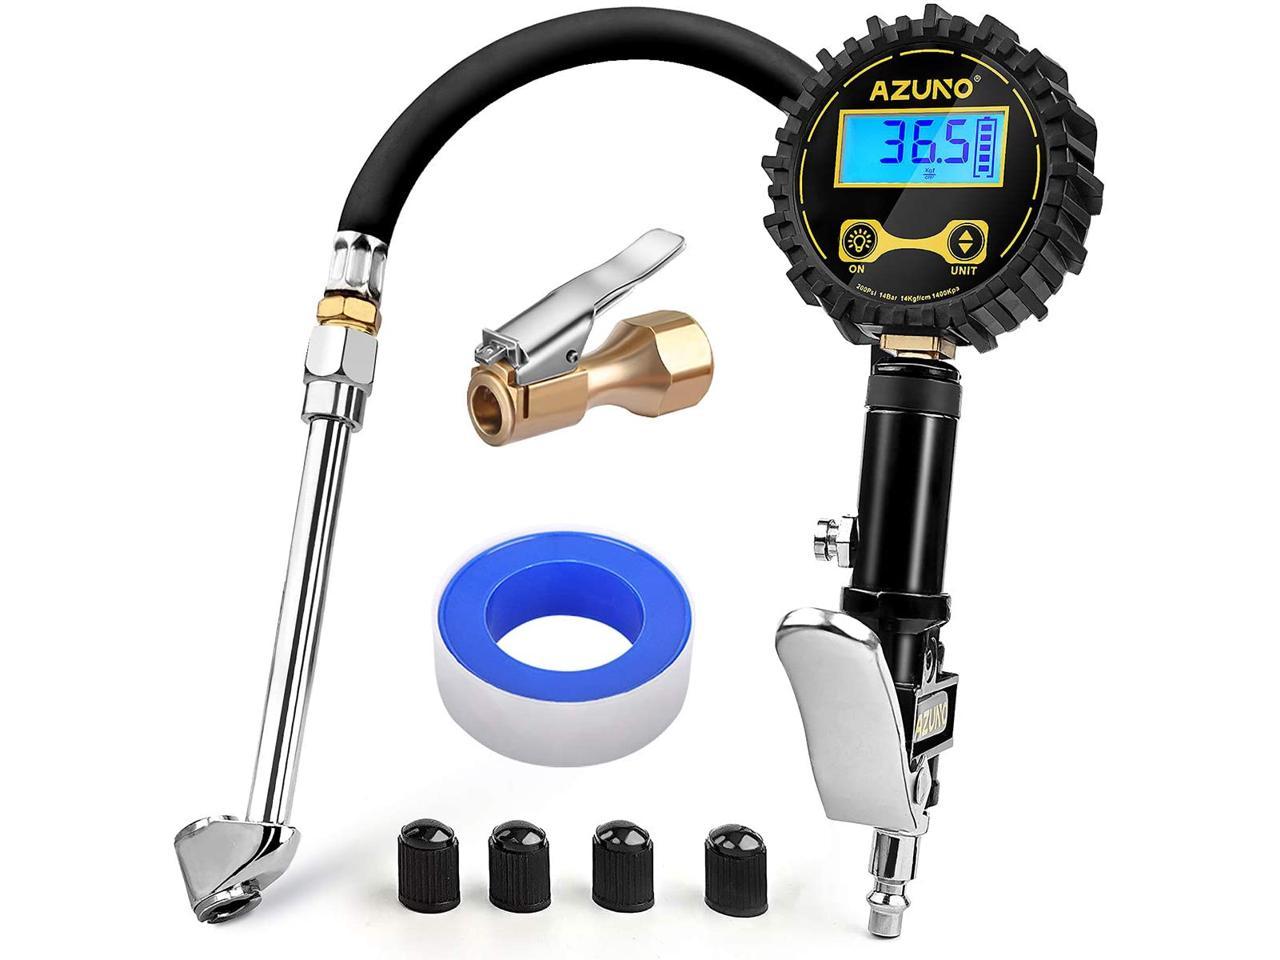 0.1 Display Resolution Onewell Digital Tire Inflator Pressure Gauge 235PSI Heavy Duty Air Chuck and Compressor Accessories With Rubber Hose and Quick Connect Plug for Truck,Automobile and Motorcycle 